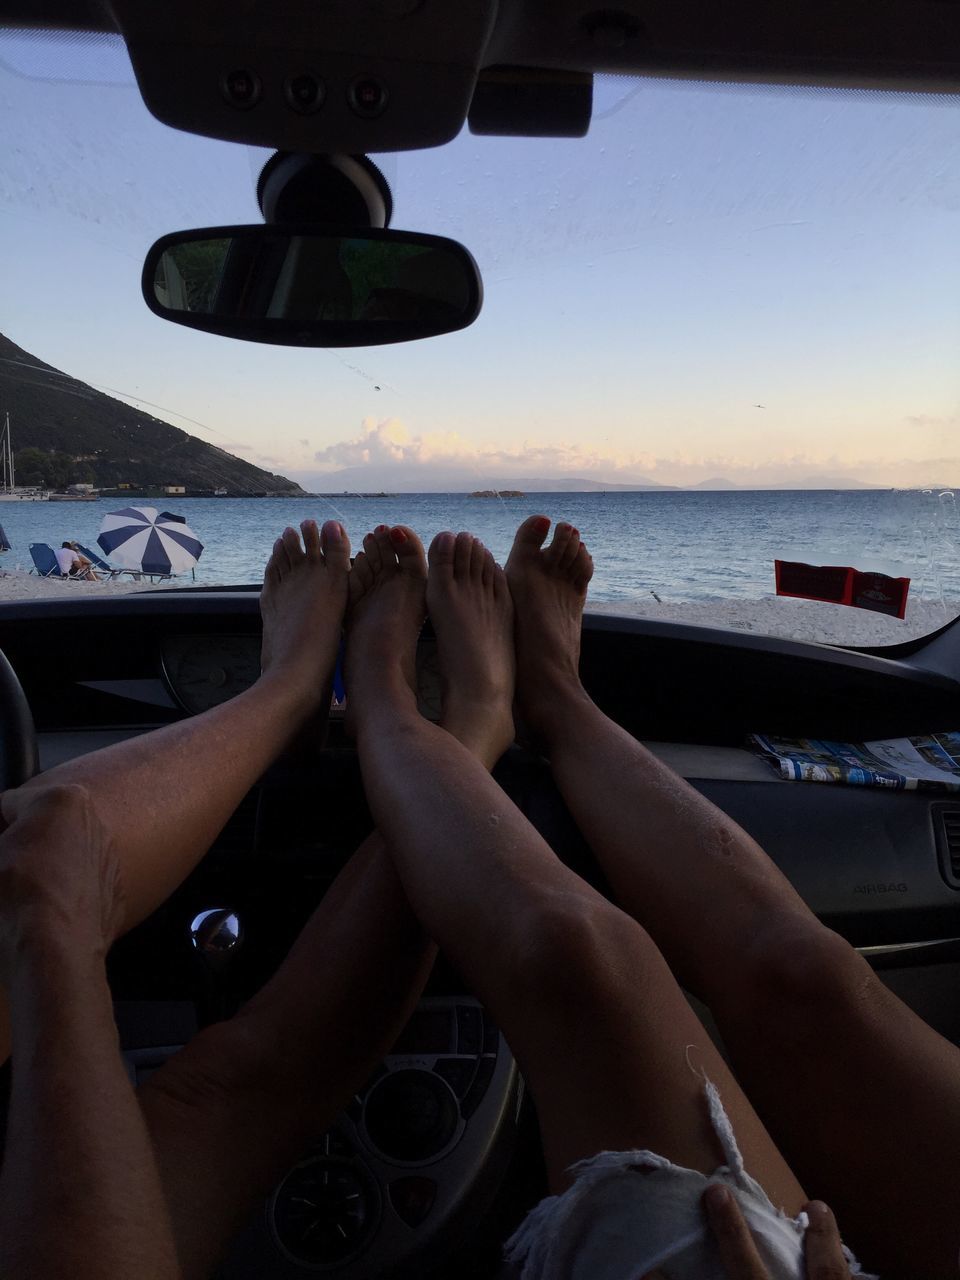 lifestyles, person, sitting, leisure activity, part of, sea, relaxation, personal perspective, holding, cropped, sky, men, human finger, transportation, technology, smart phone